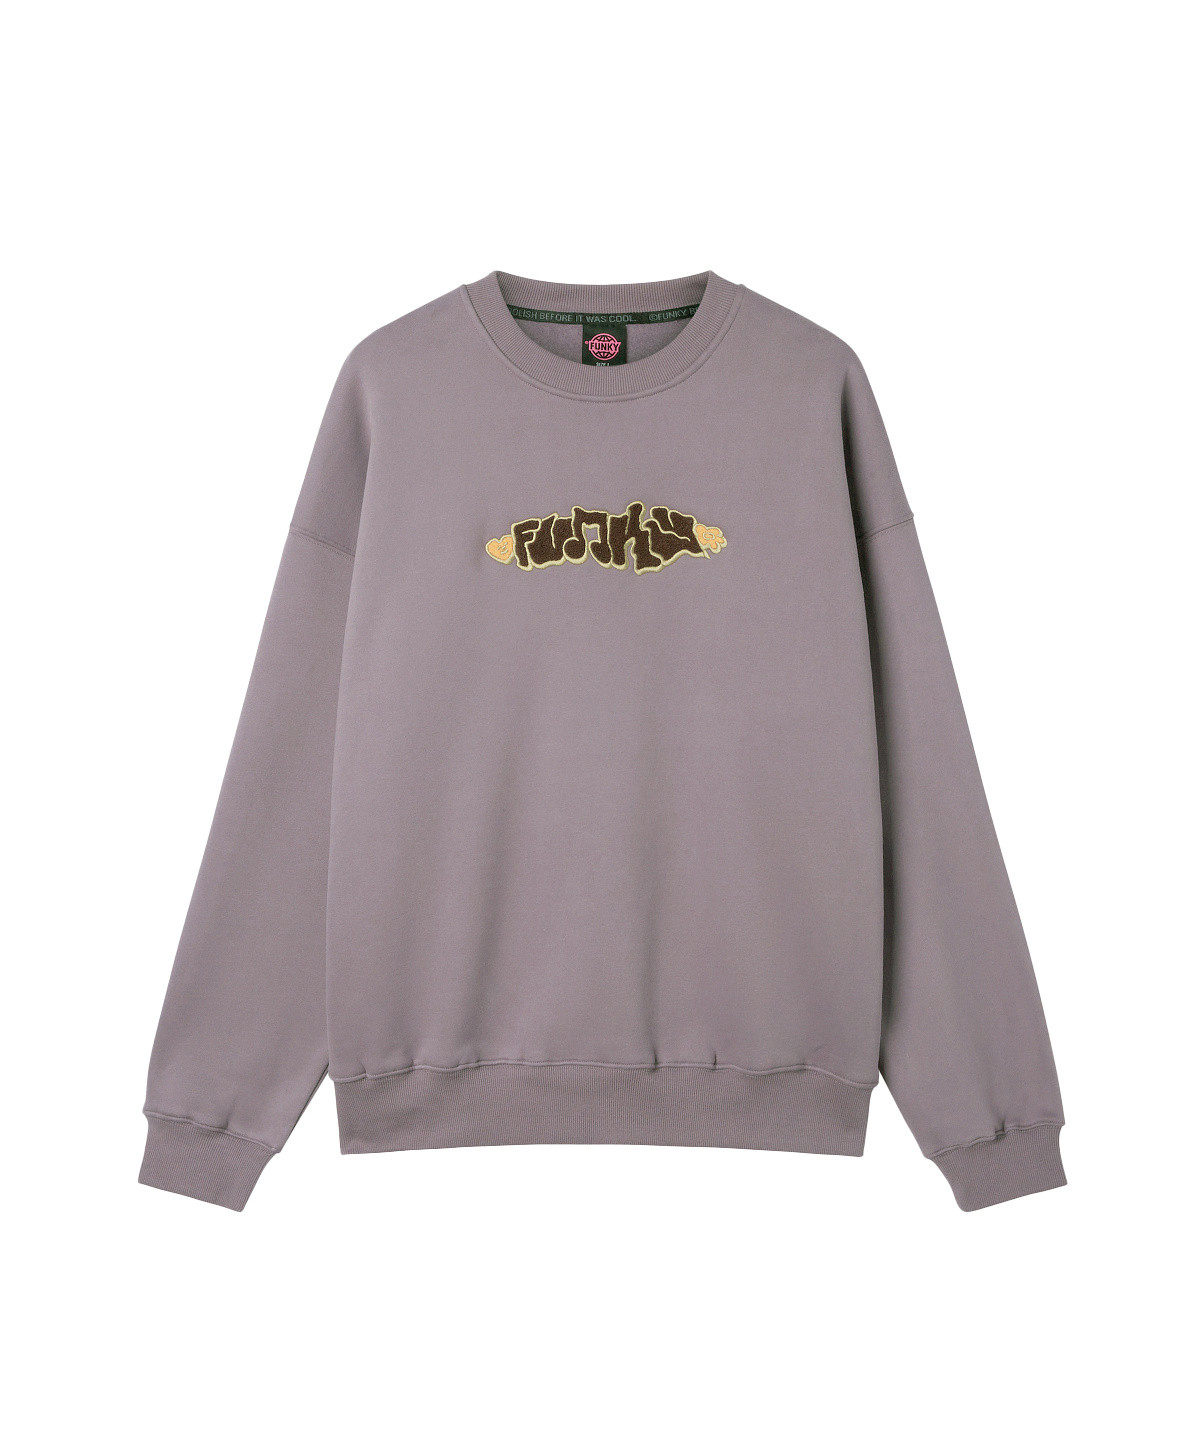 Funky - Crewneck sweatshirt with embroidered logo, Purple Lilac, large image number 0